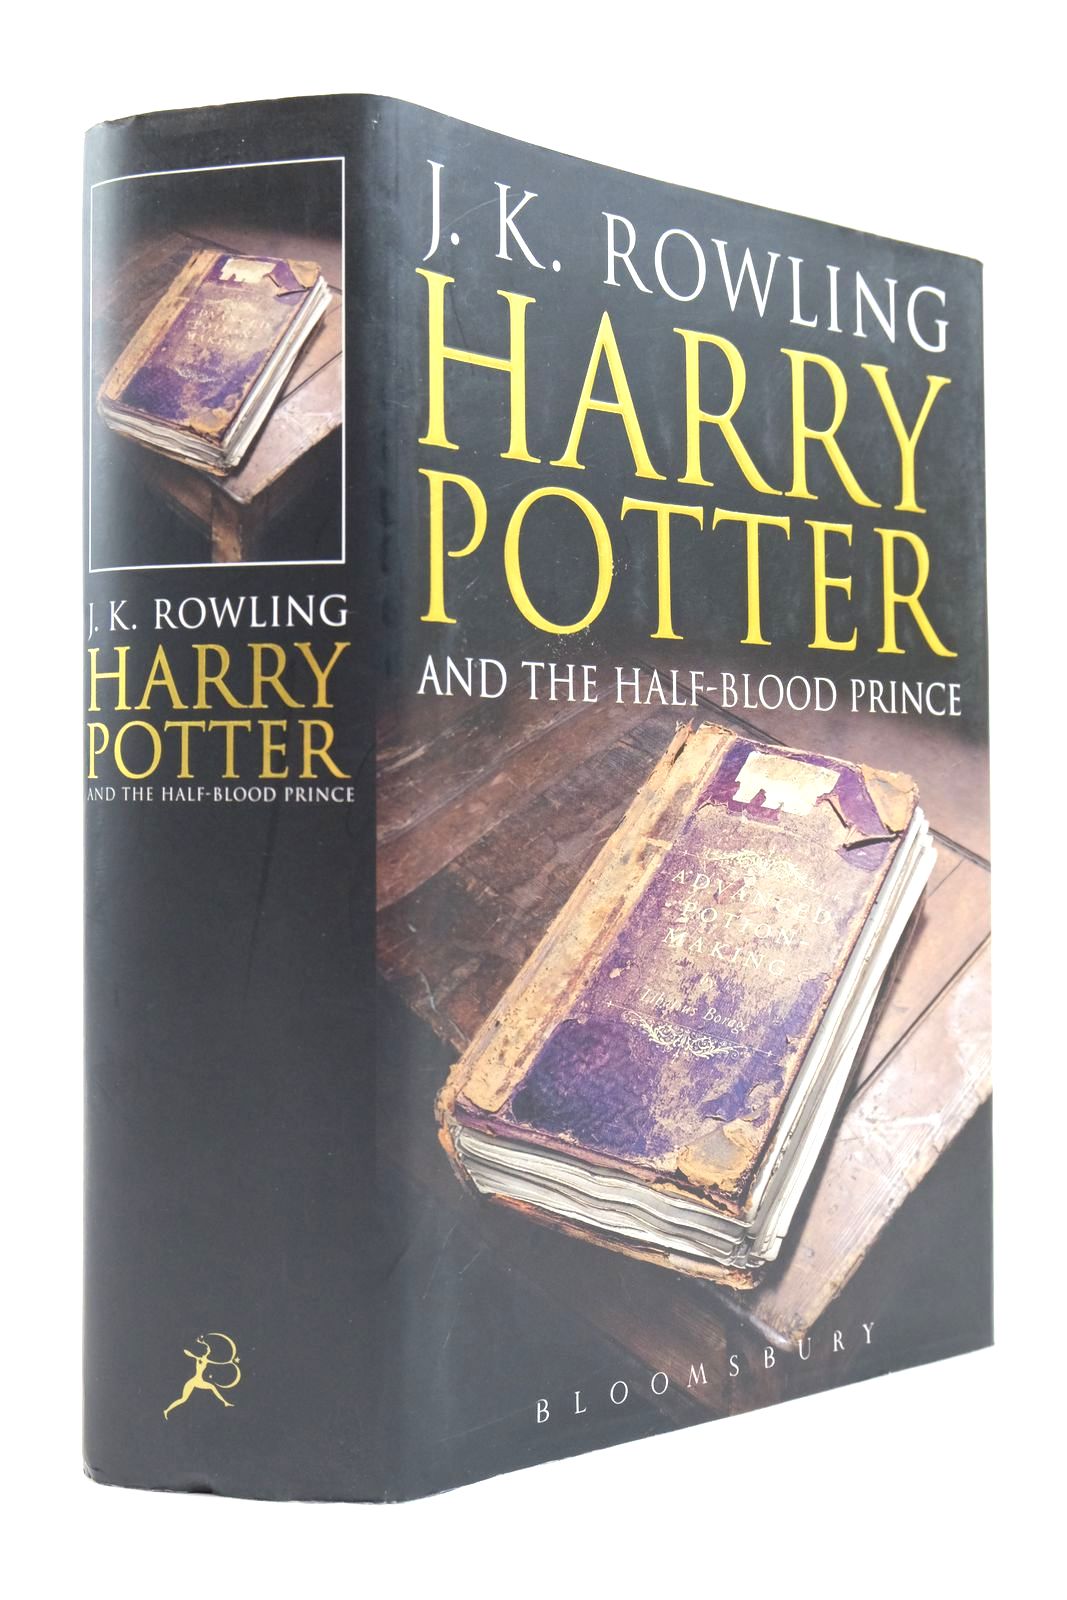 Photo of HARRY POTTER AND THE HALF-BLOOD PRINCE written by Rowling, J.K. published by Bloomsbury (STOCK CODE: 2139283)  for sale by Stella & Rose's Books